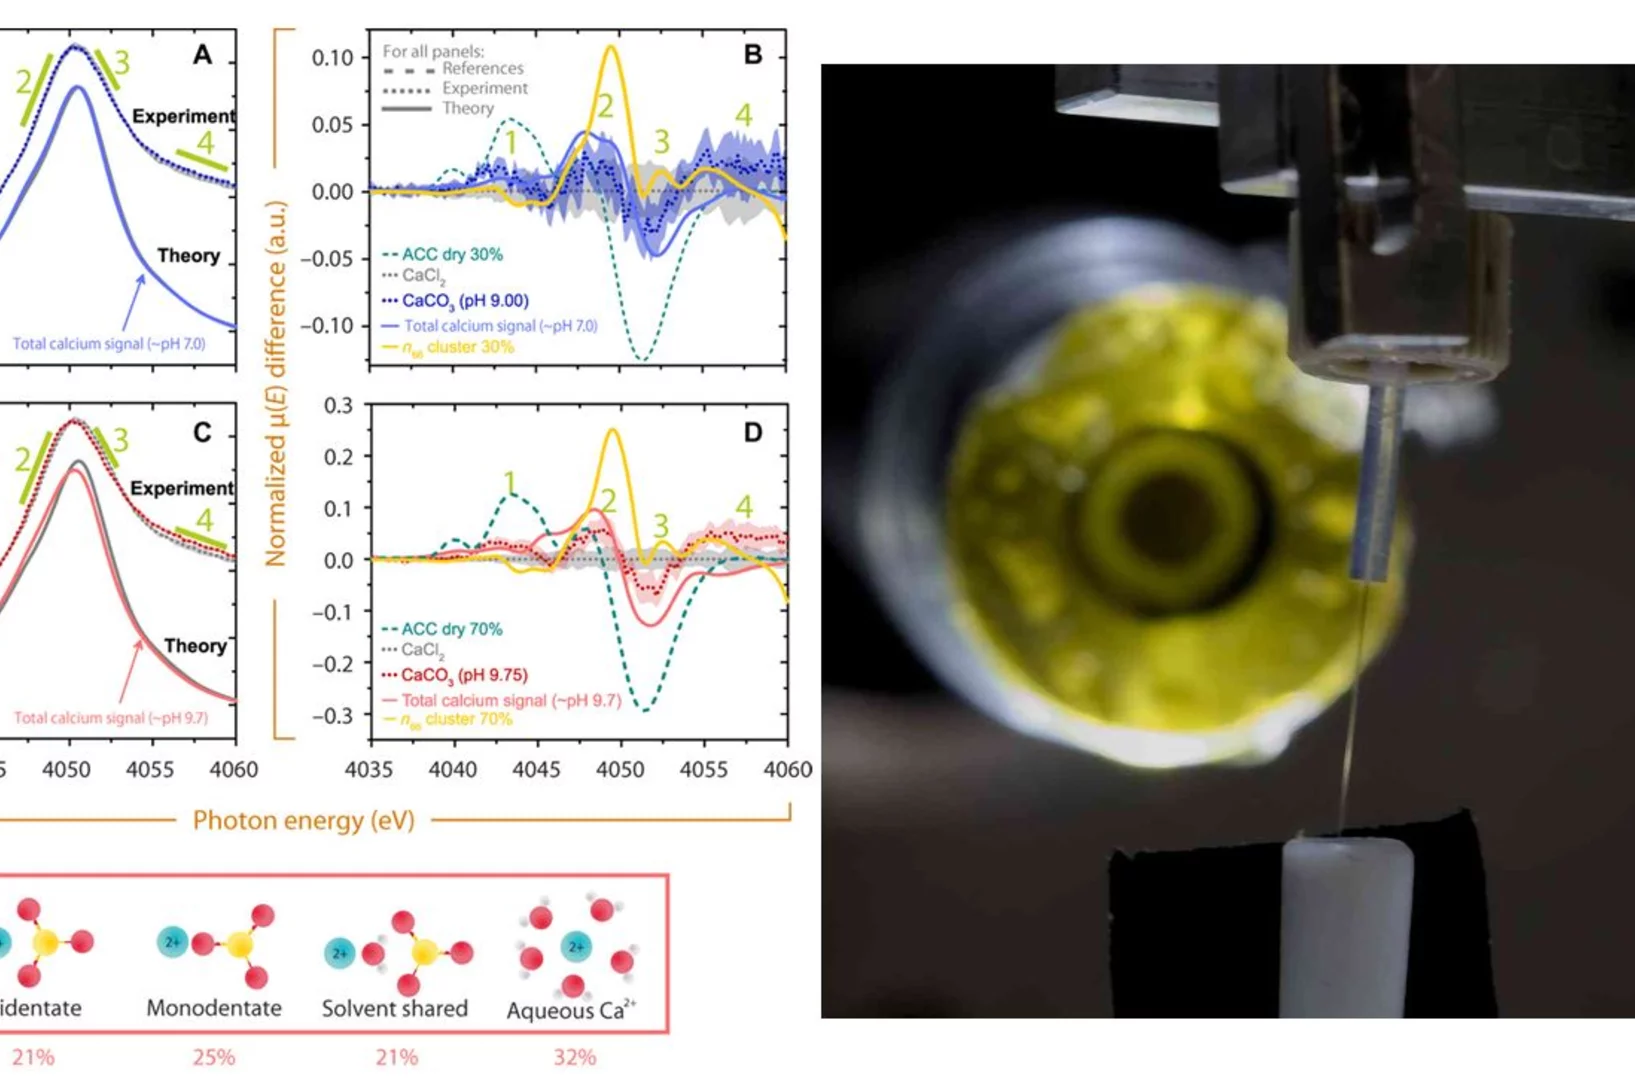 Left: X-ray absorption spectra from supersaturated calcium carbonate solutions taken with a liquid microjet at the PHOENIX beamline. Comparison of the spectra with theoretical modeling shows the dominance of various ion pairs in solution, as expected in a classical solution. Right: image of liquid microjet in PHOENIX endstation.